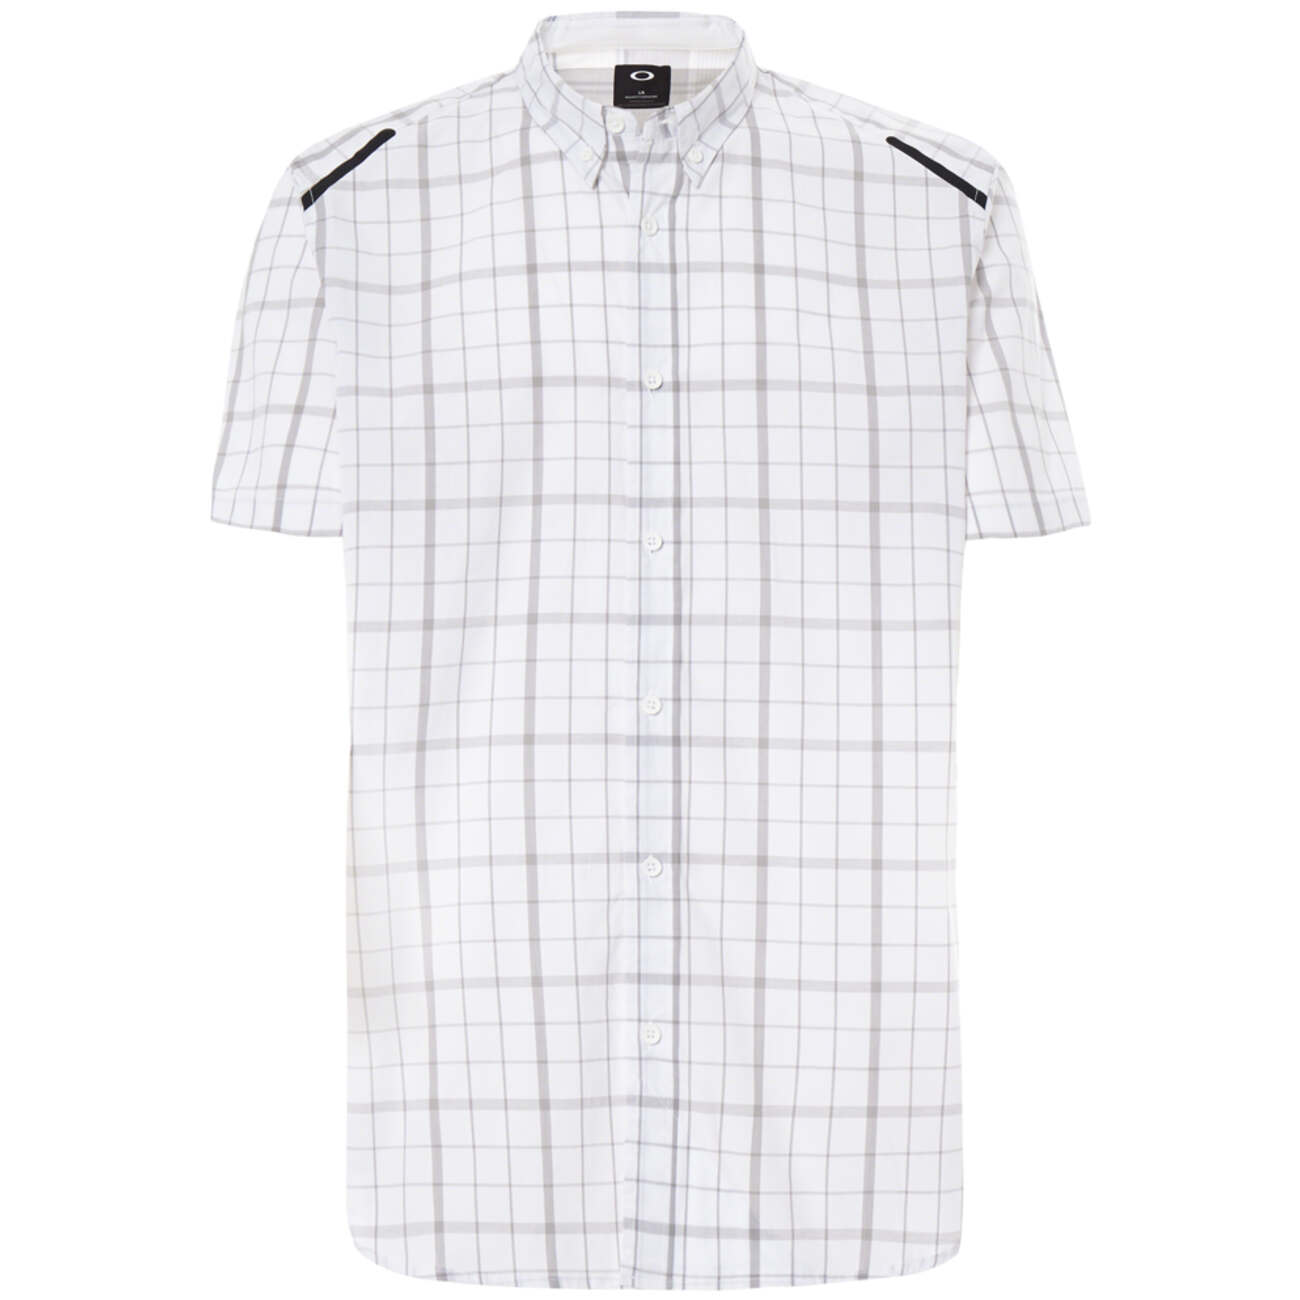 Oakley Chemise Manches Courtes Local Plaid White